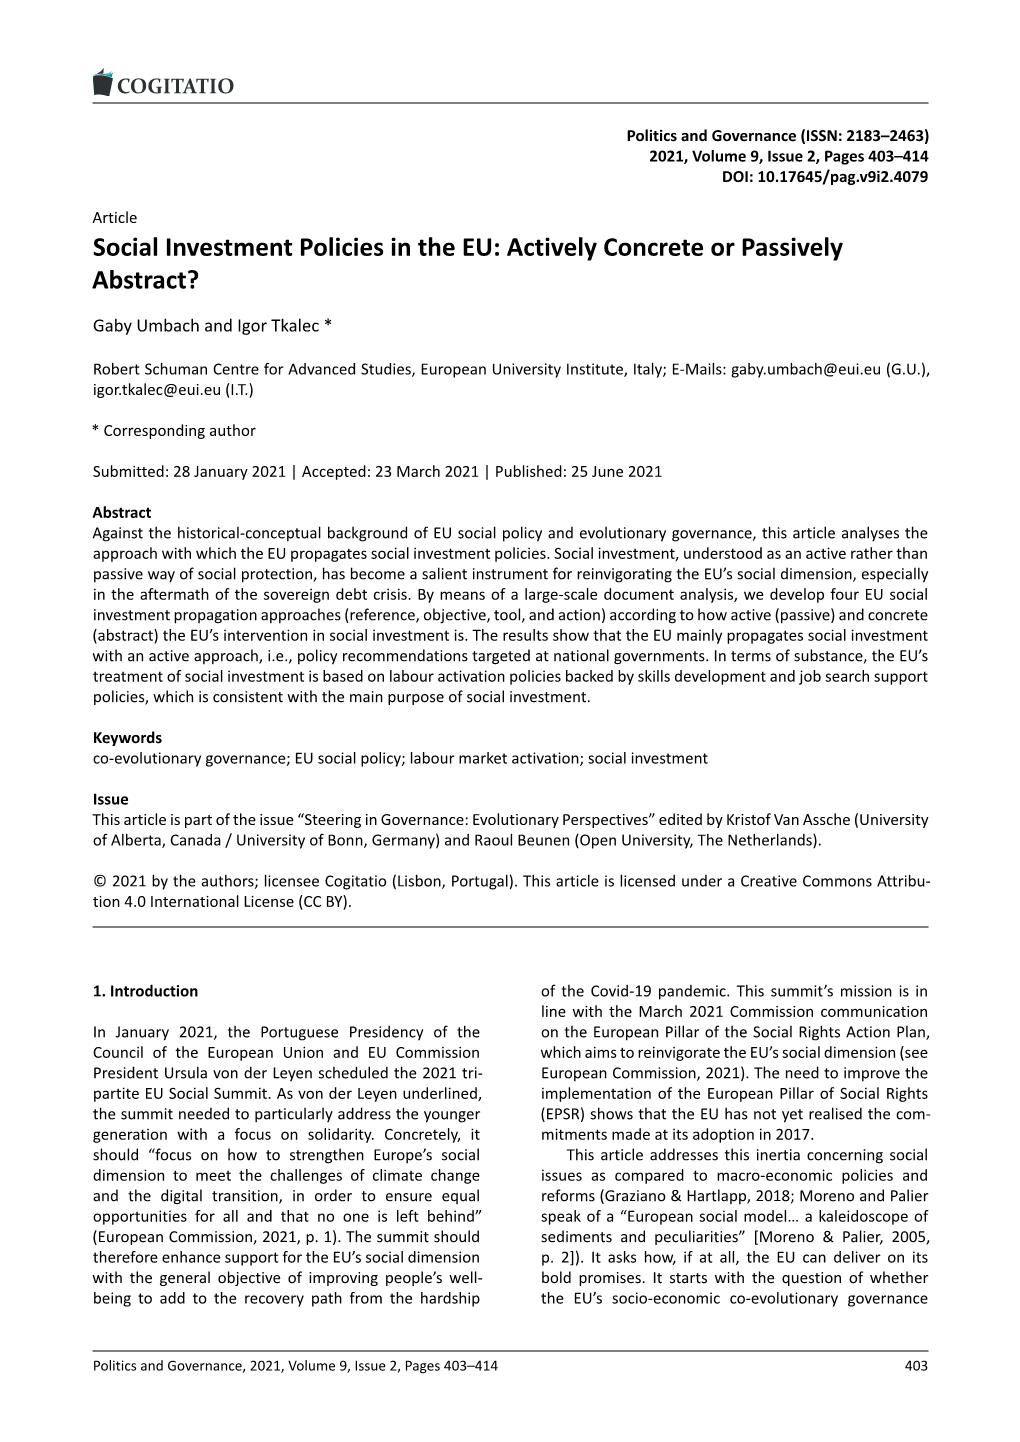 Social Investment Policies in the EU: Actively Concrete Or Passively Abstract?